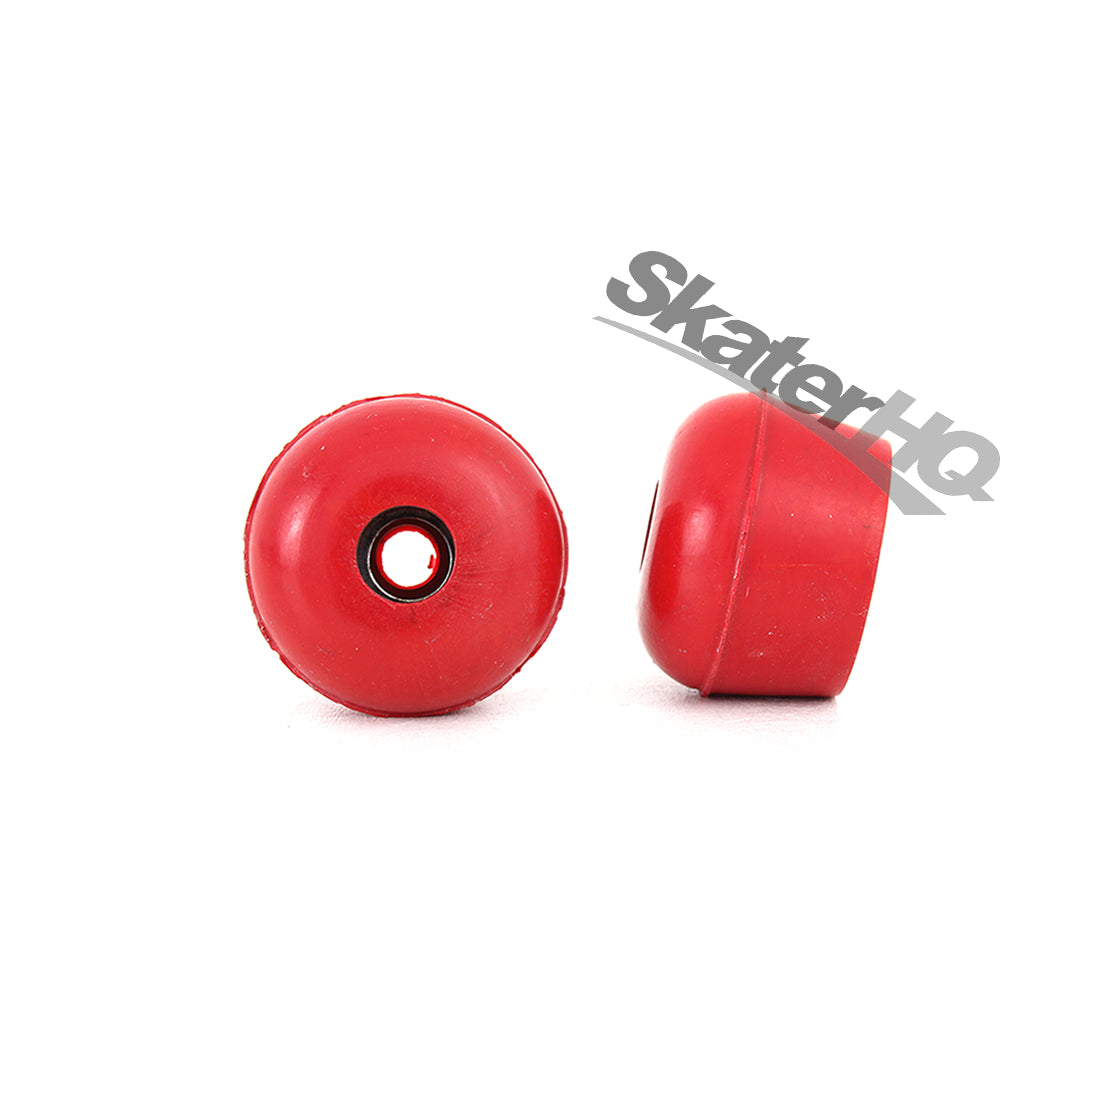 Sure-Grip Dance Toe Stops X Small PAIR - Red Roller Skate Hardware and Parts